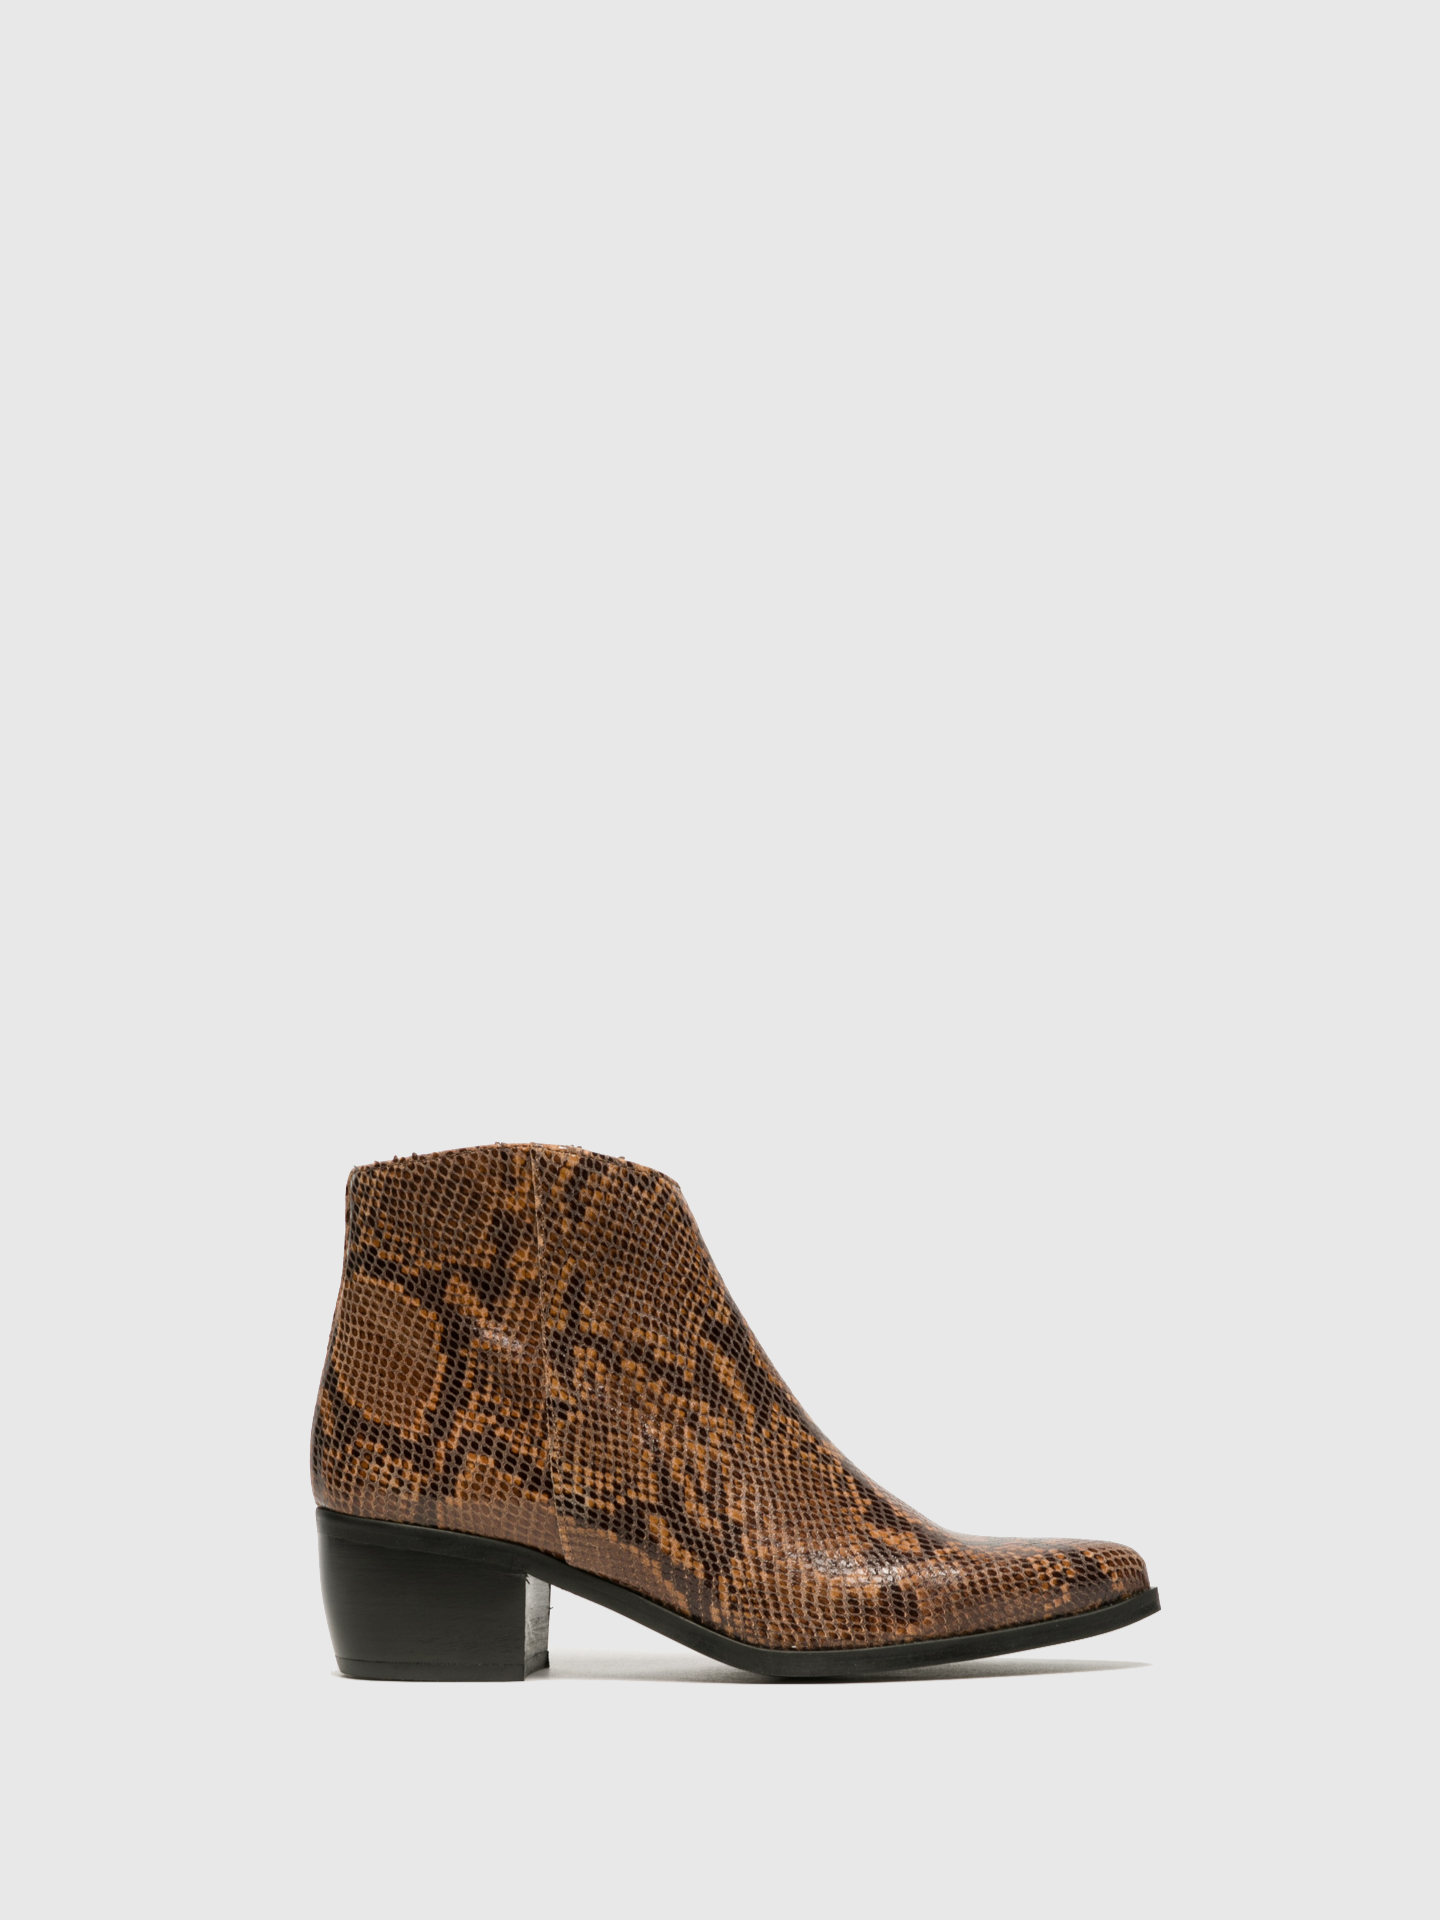 Foreva Brown Zip Up Ankle Boots